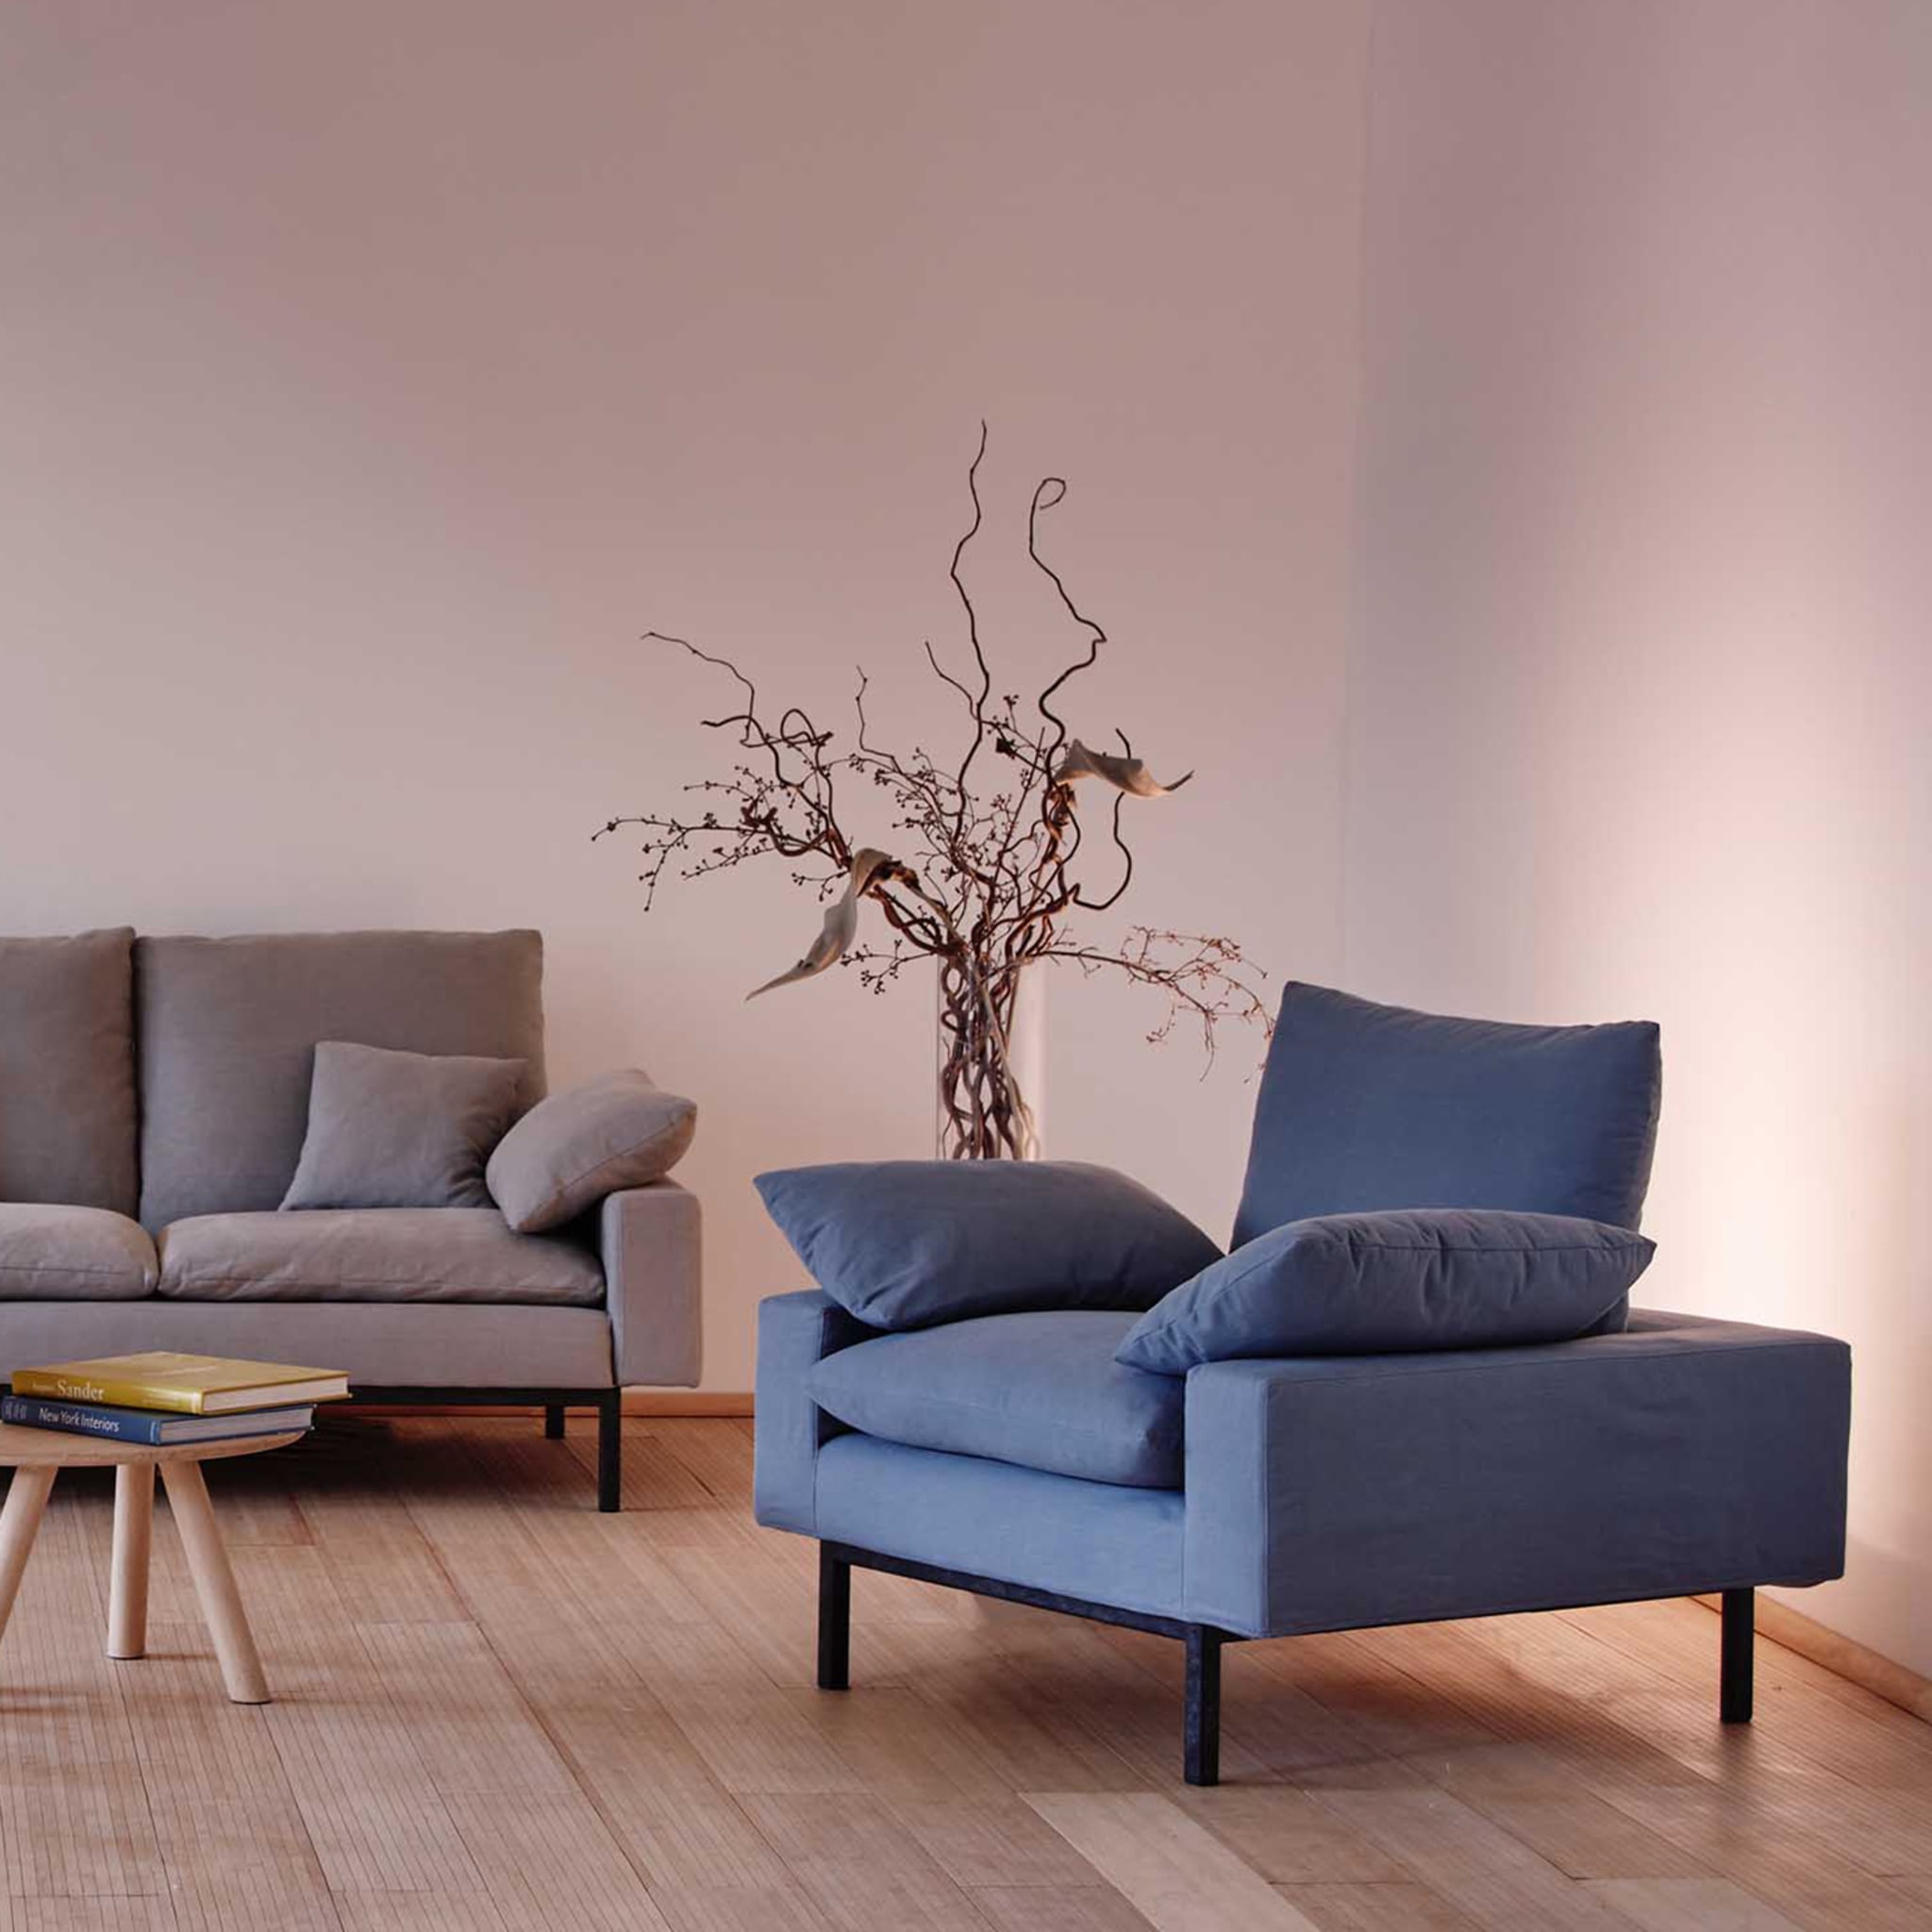 Bad Ecological Blue Armchair by Vanessa Tambelli - Alternative view 3